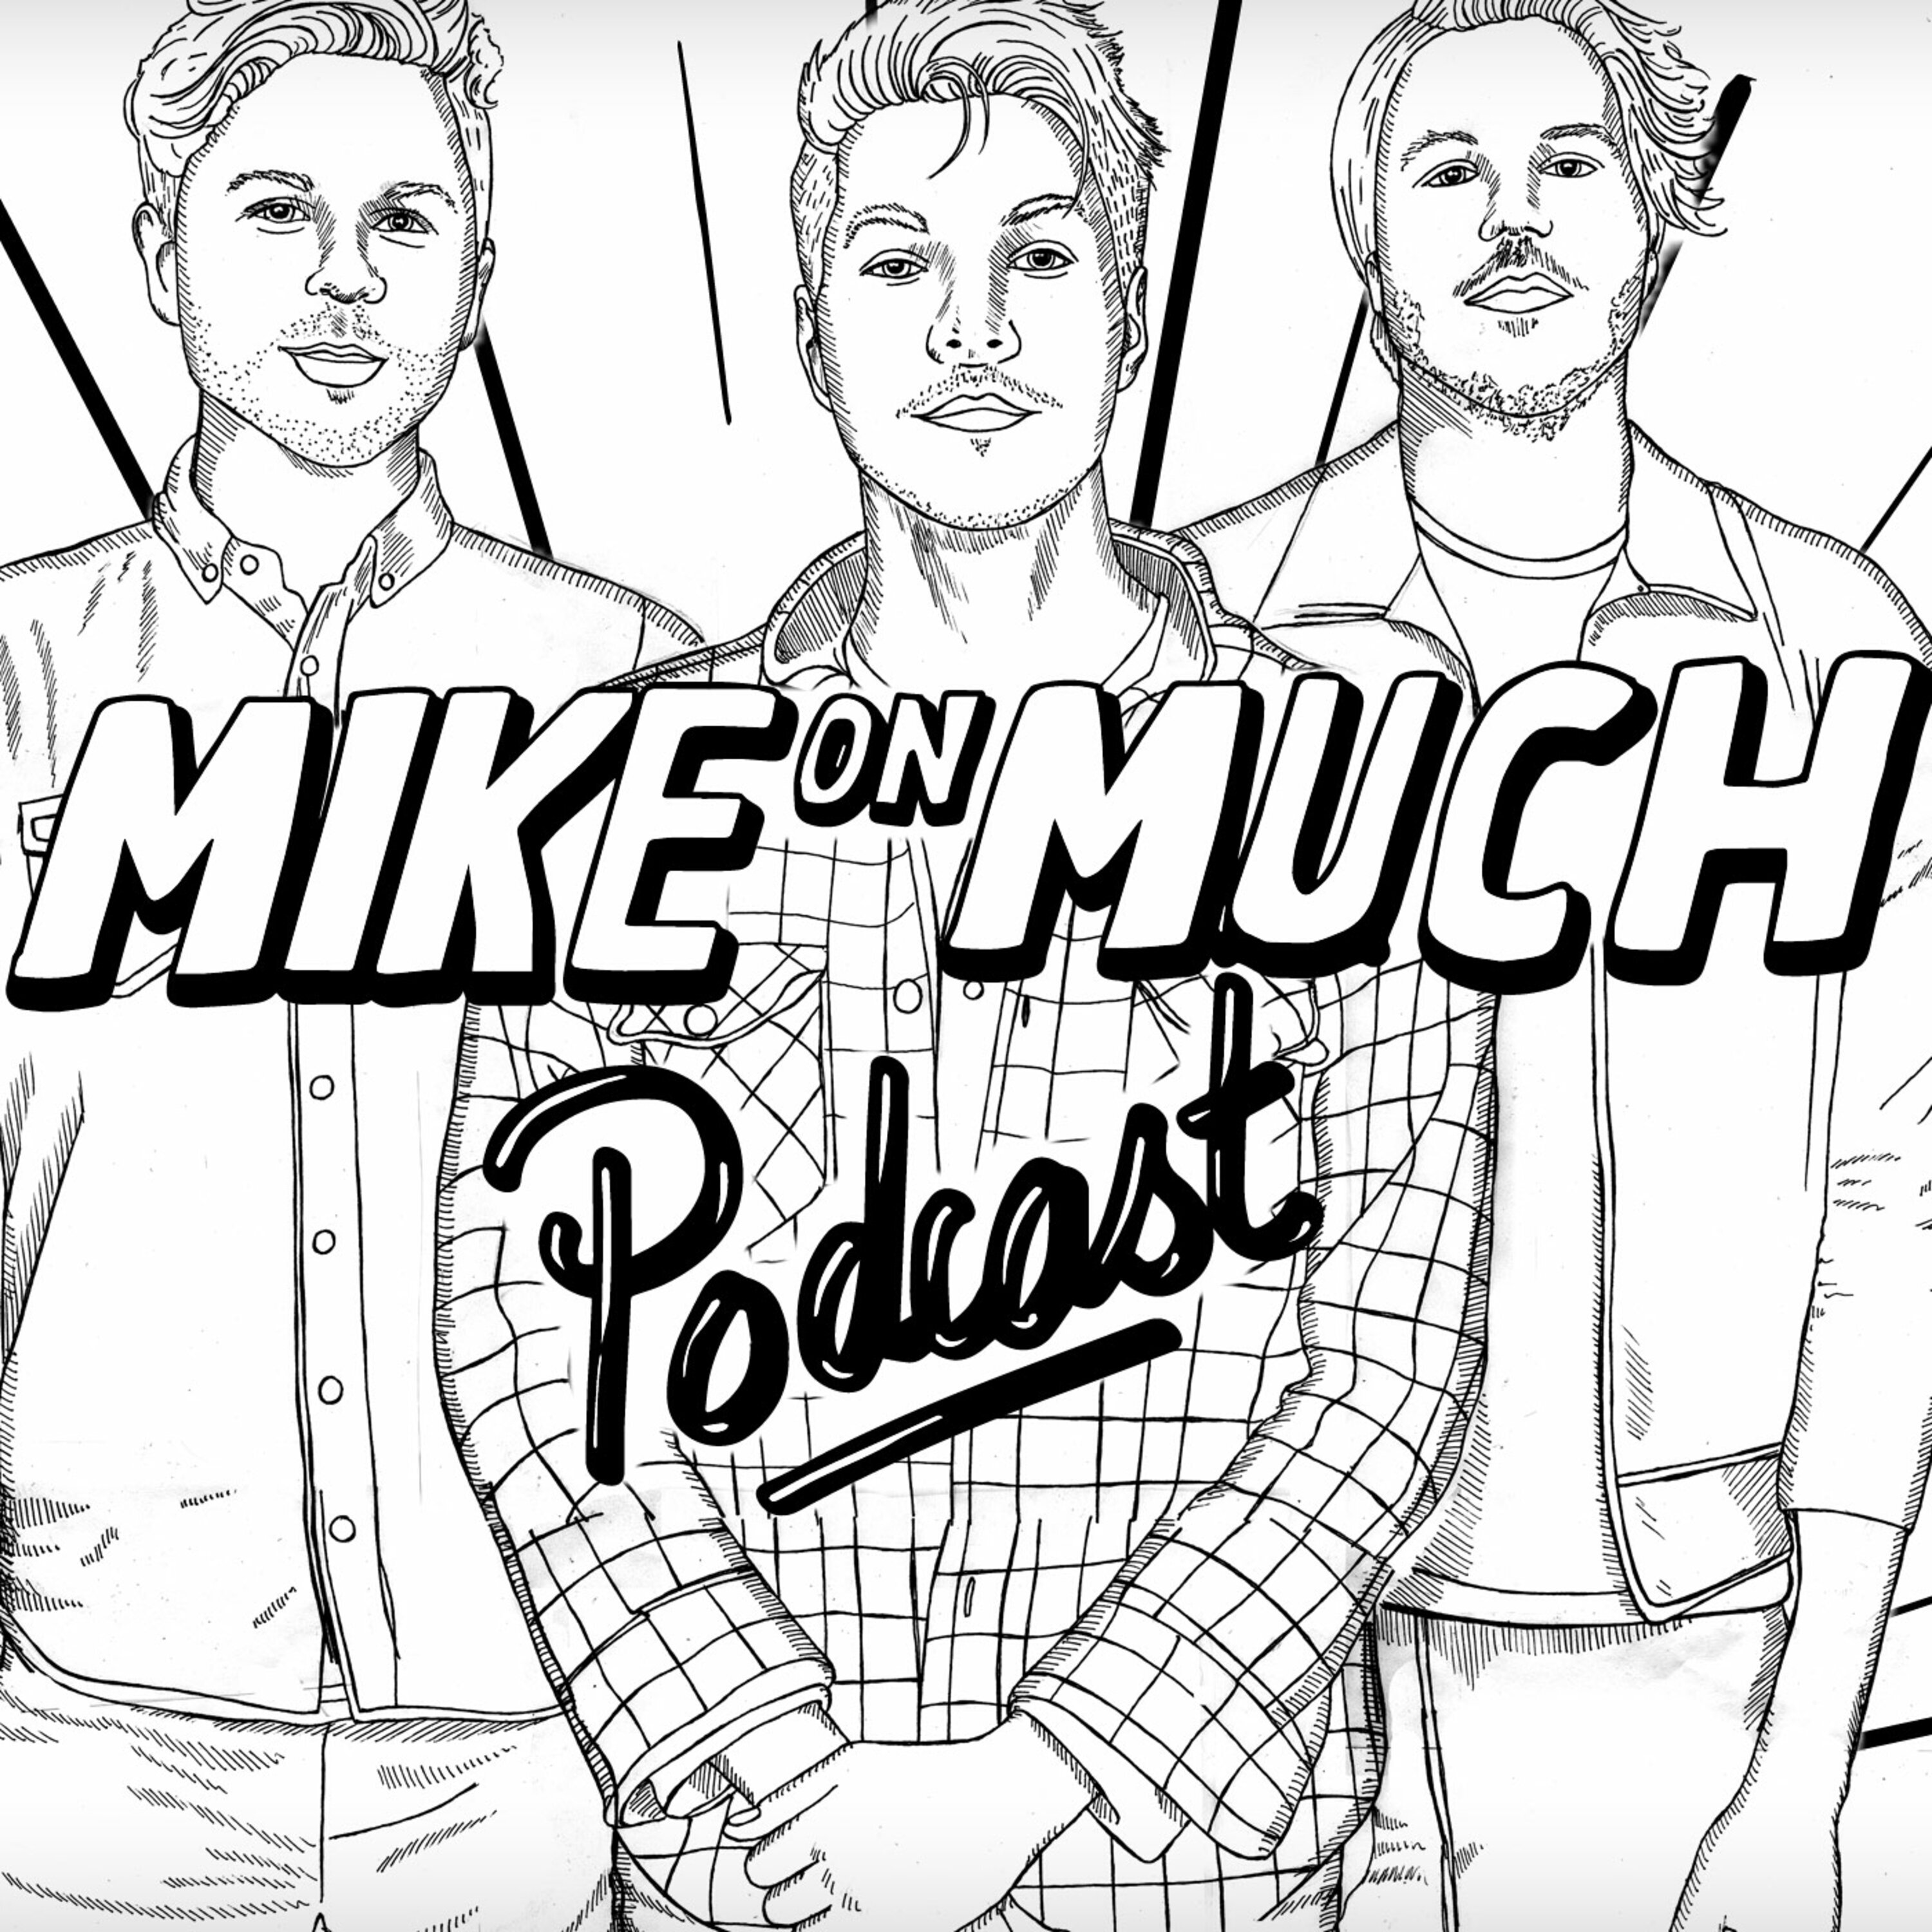 Season 1 Mike On Much: “Sometimes You’re Not Pinging And Ponging. You’re just Ponging.”